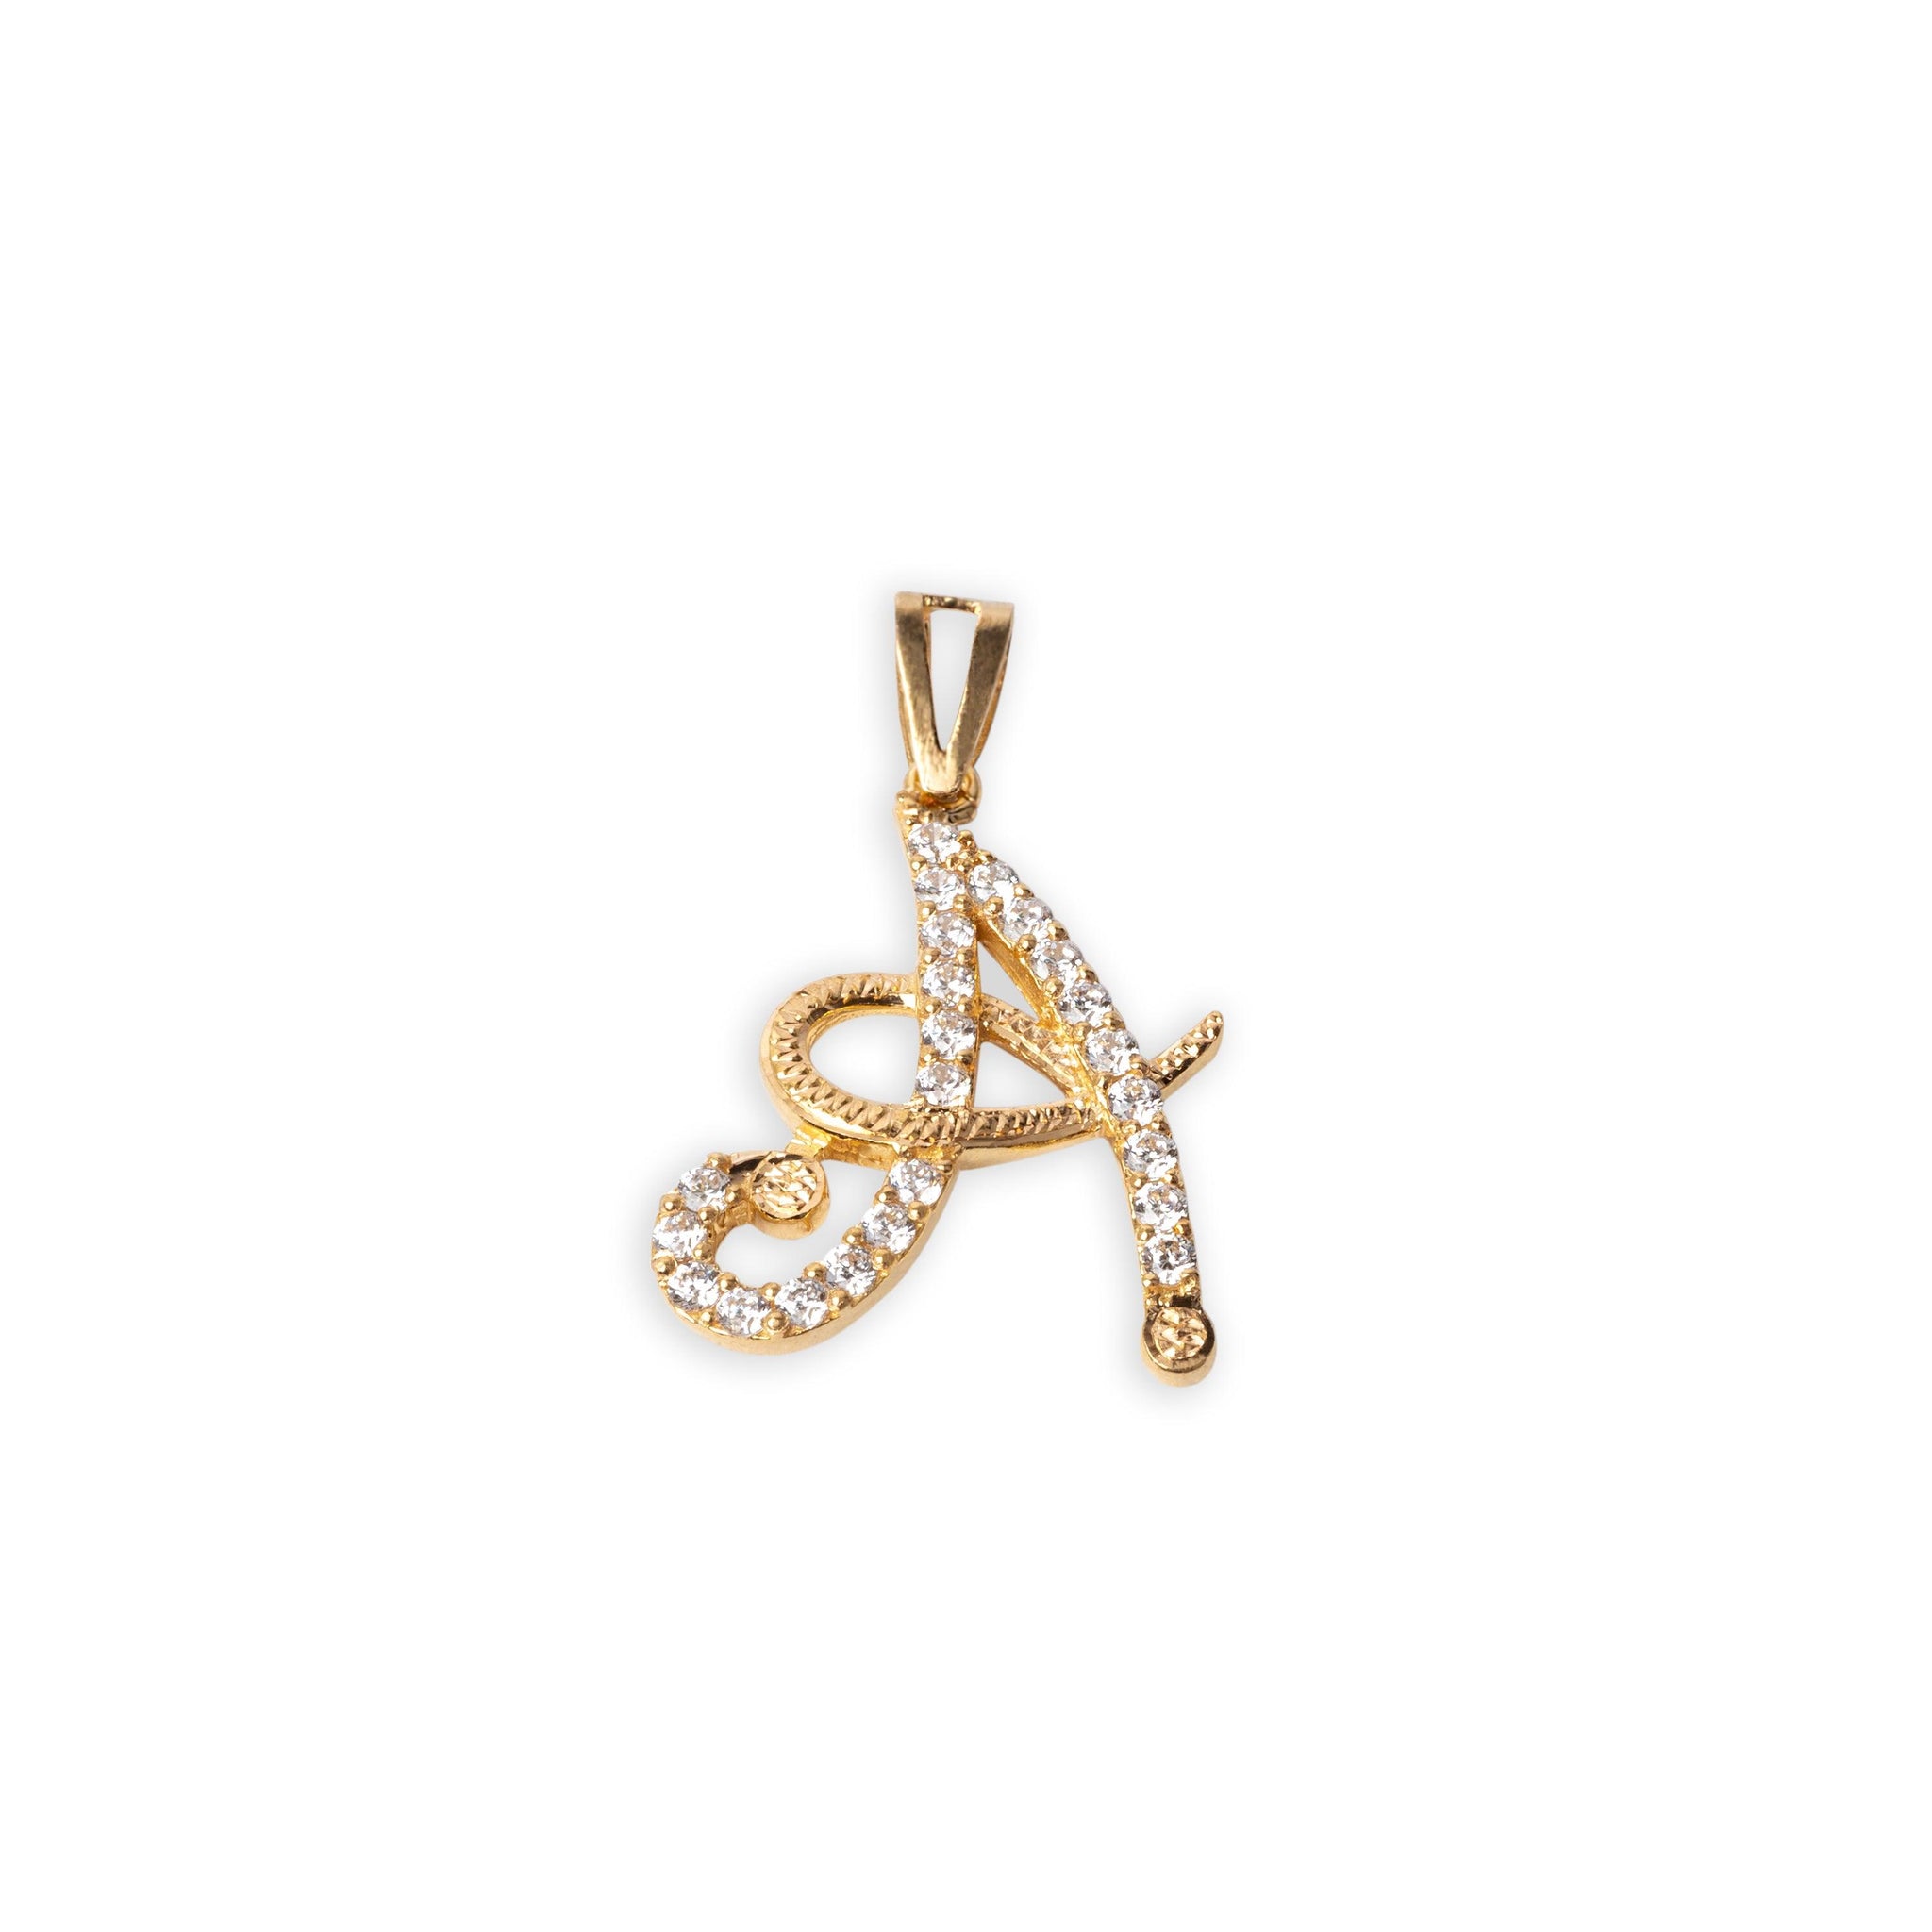 'A' 22ct Gold Initial Pendant with Cubic Zirconia Stones P-7039-A